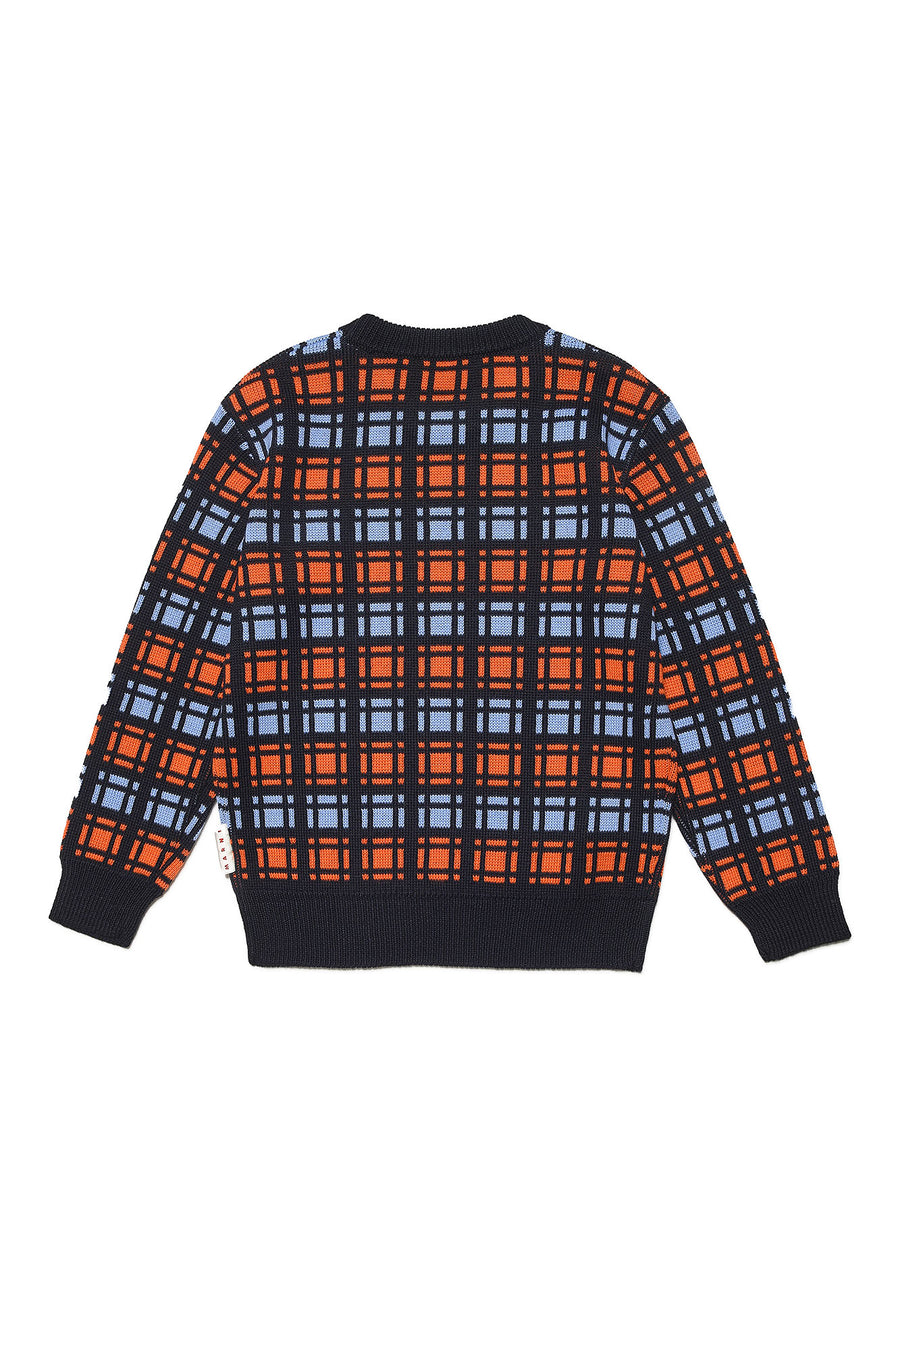 Checked knit sweater by Marni